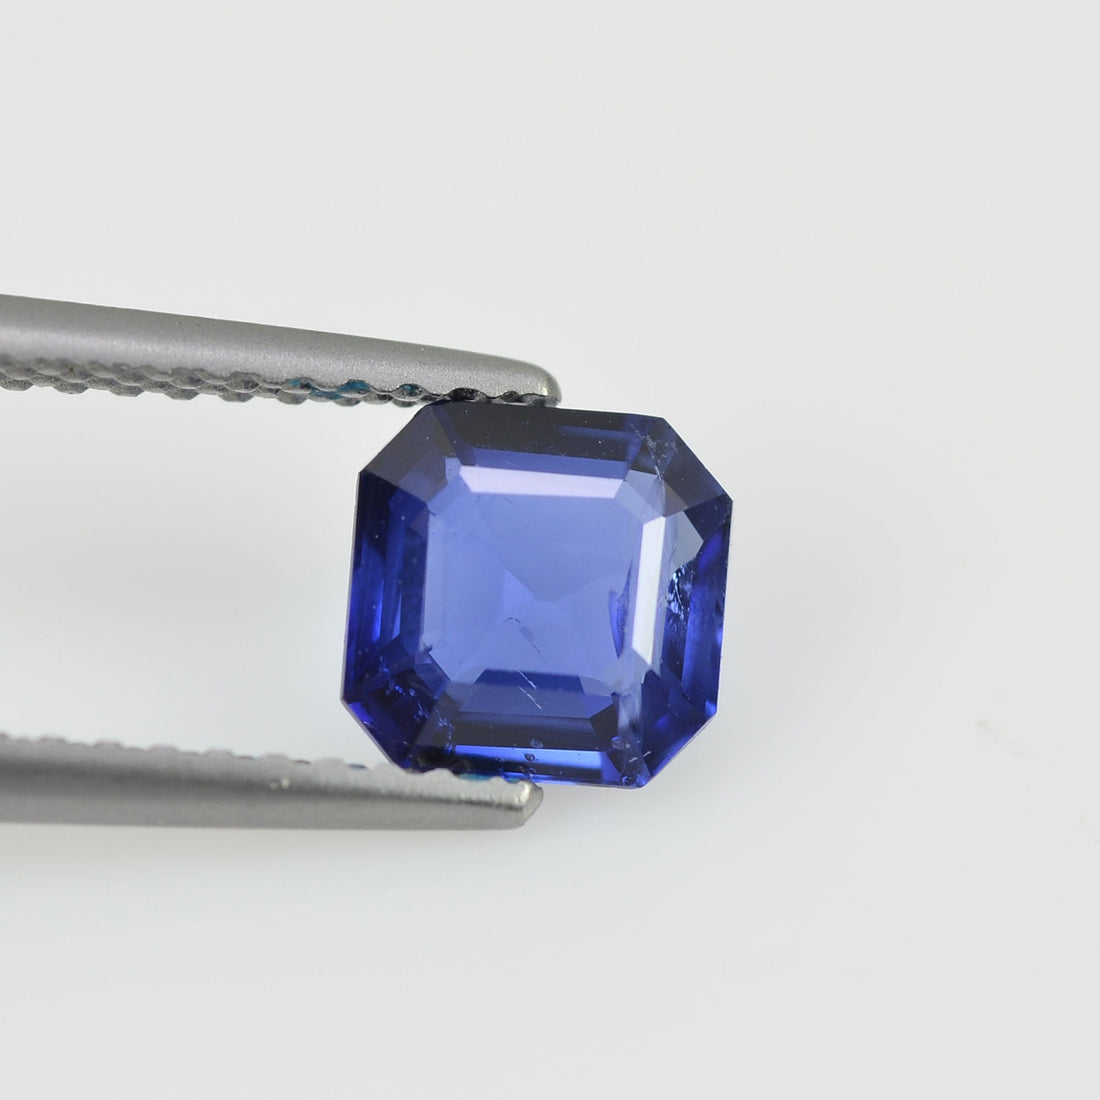 1.02 cts Unheated Natural Blue Sapphire Loose Gemstone Octagon Cut